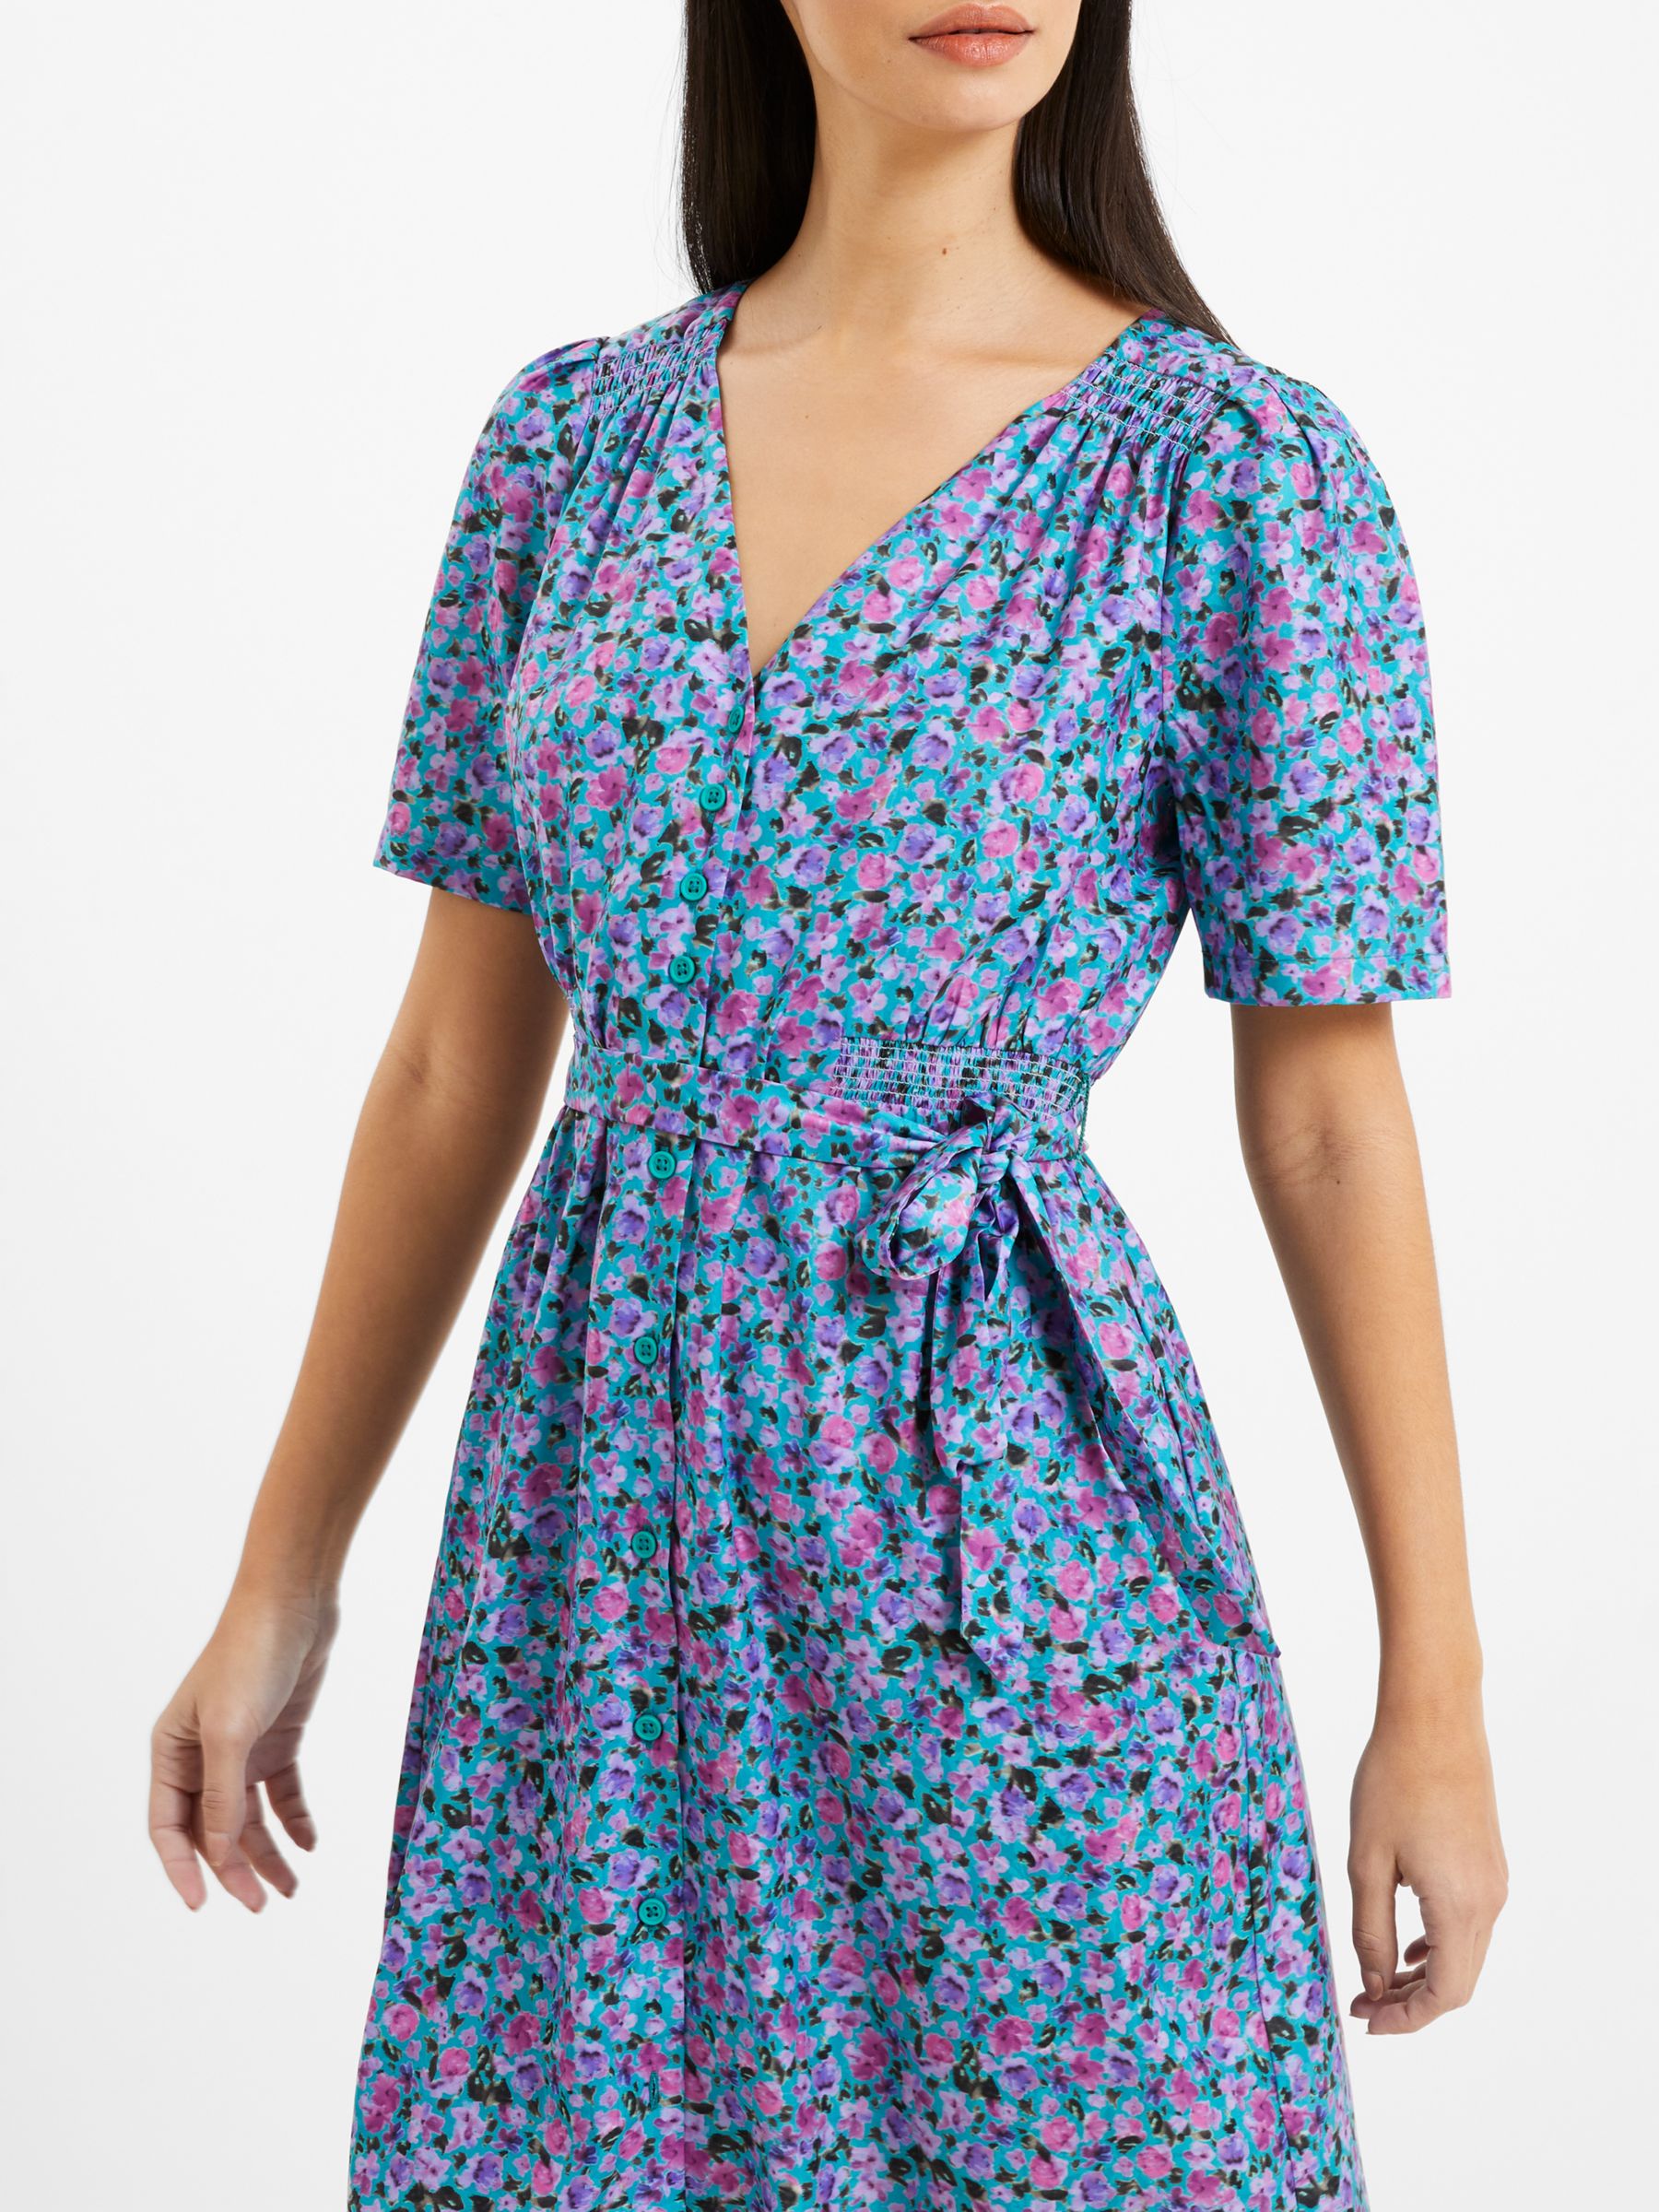 Buy French Connection Alezzia Floral Mini Dress, Jaded Teal Online at johnlewis.com